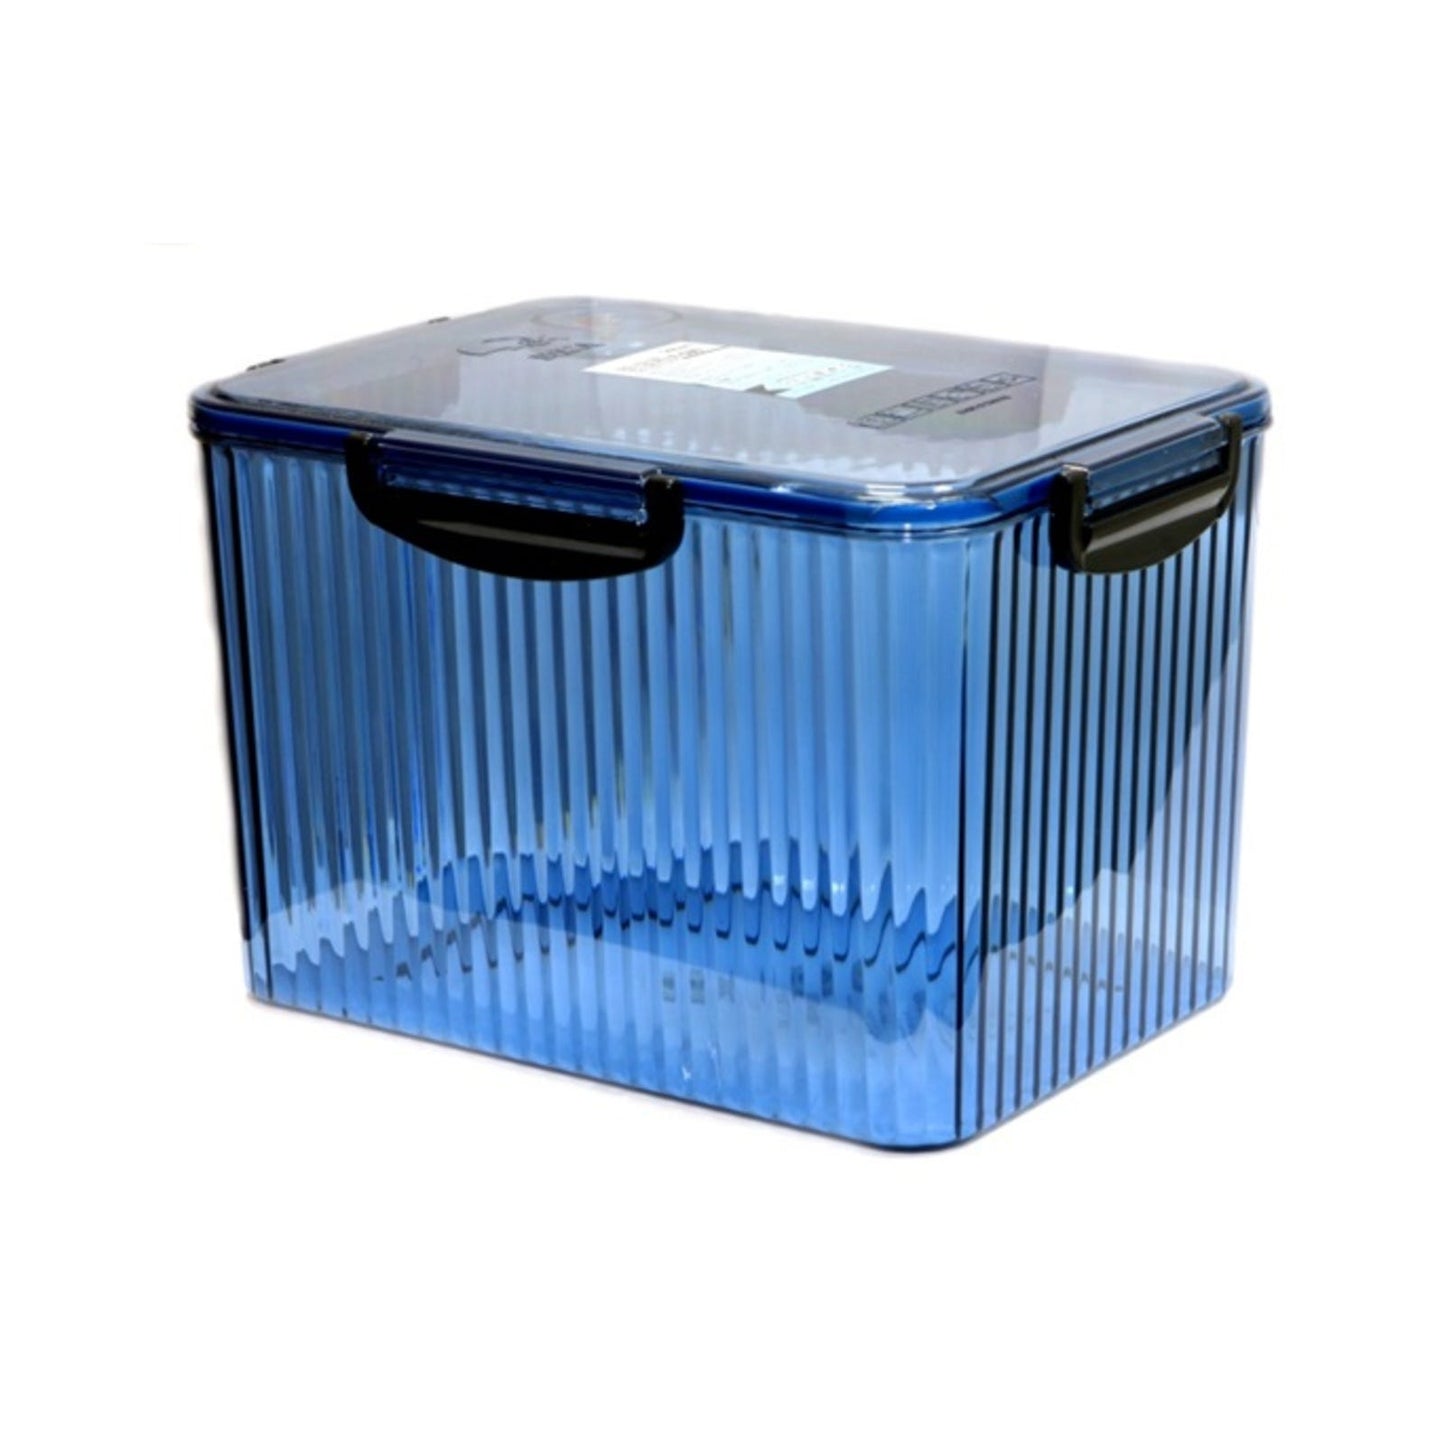 Dry Box F-380/580 (Blue) With Free Silica Gel 1 bottle 500g